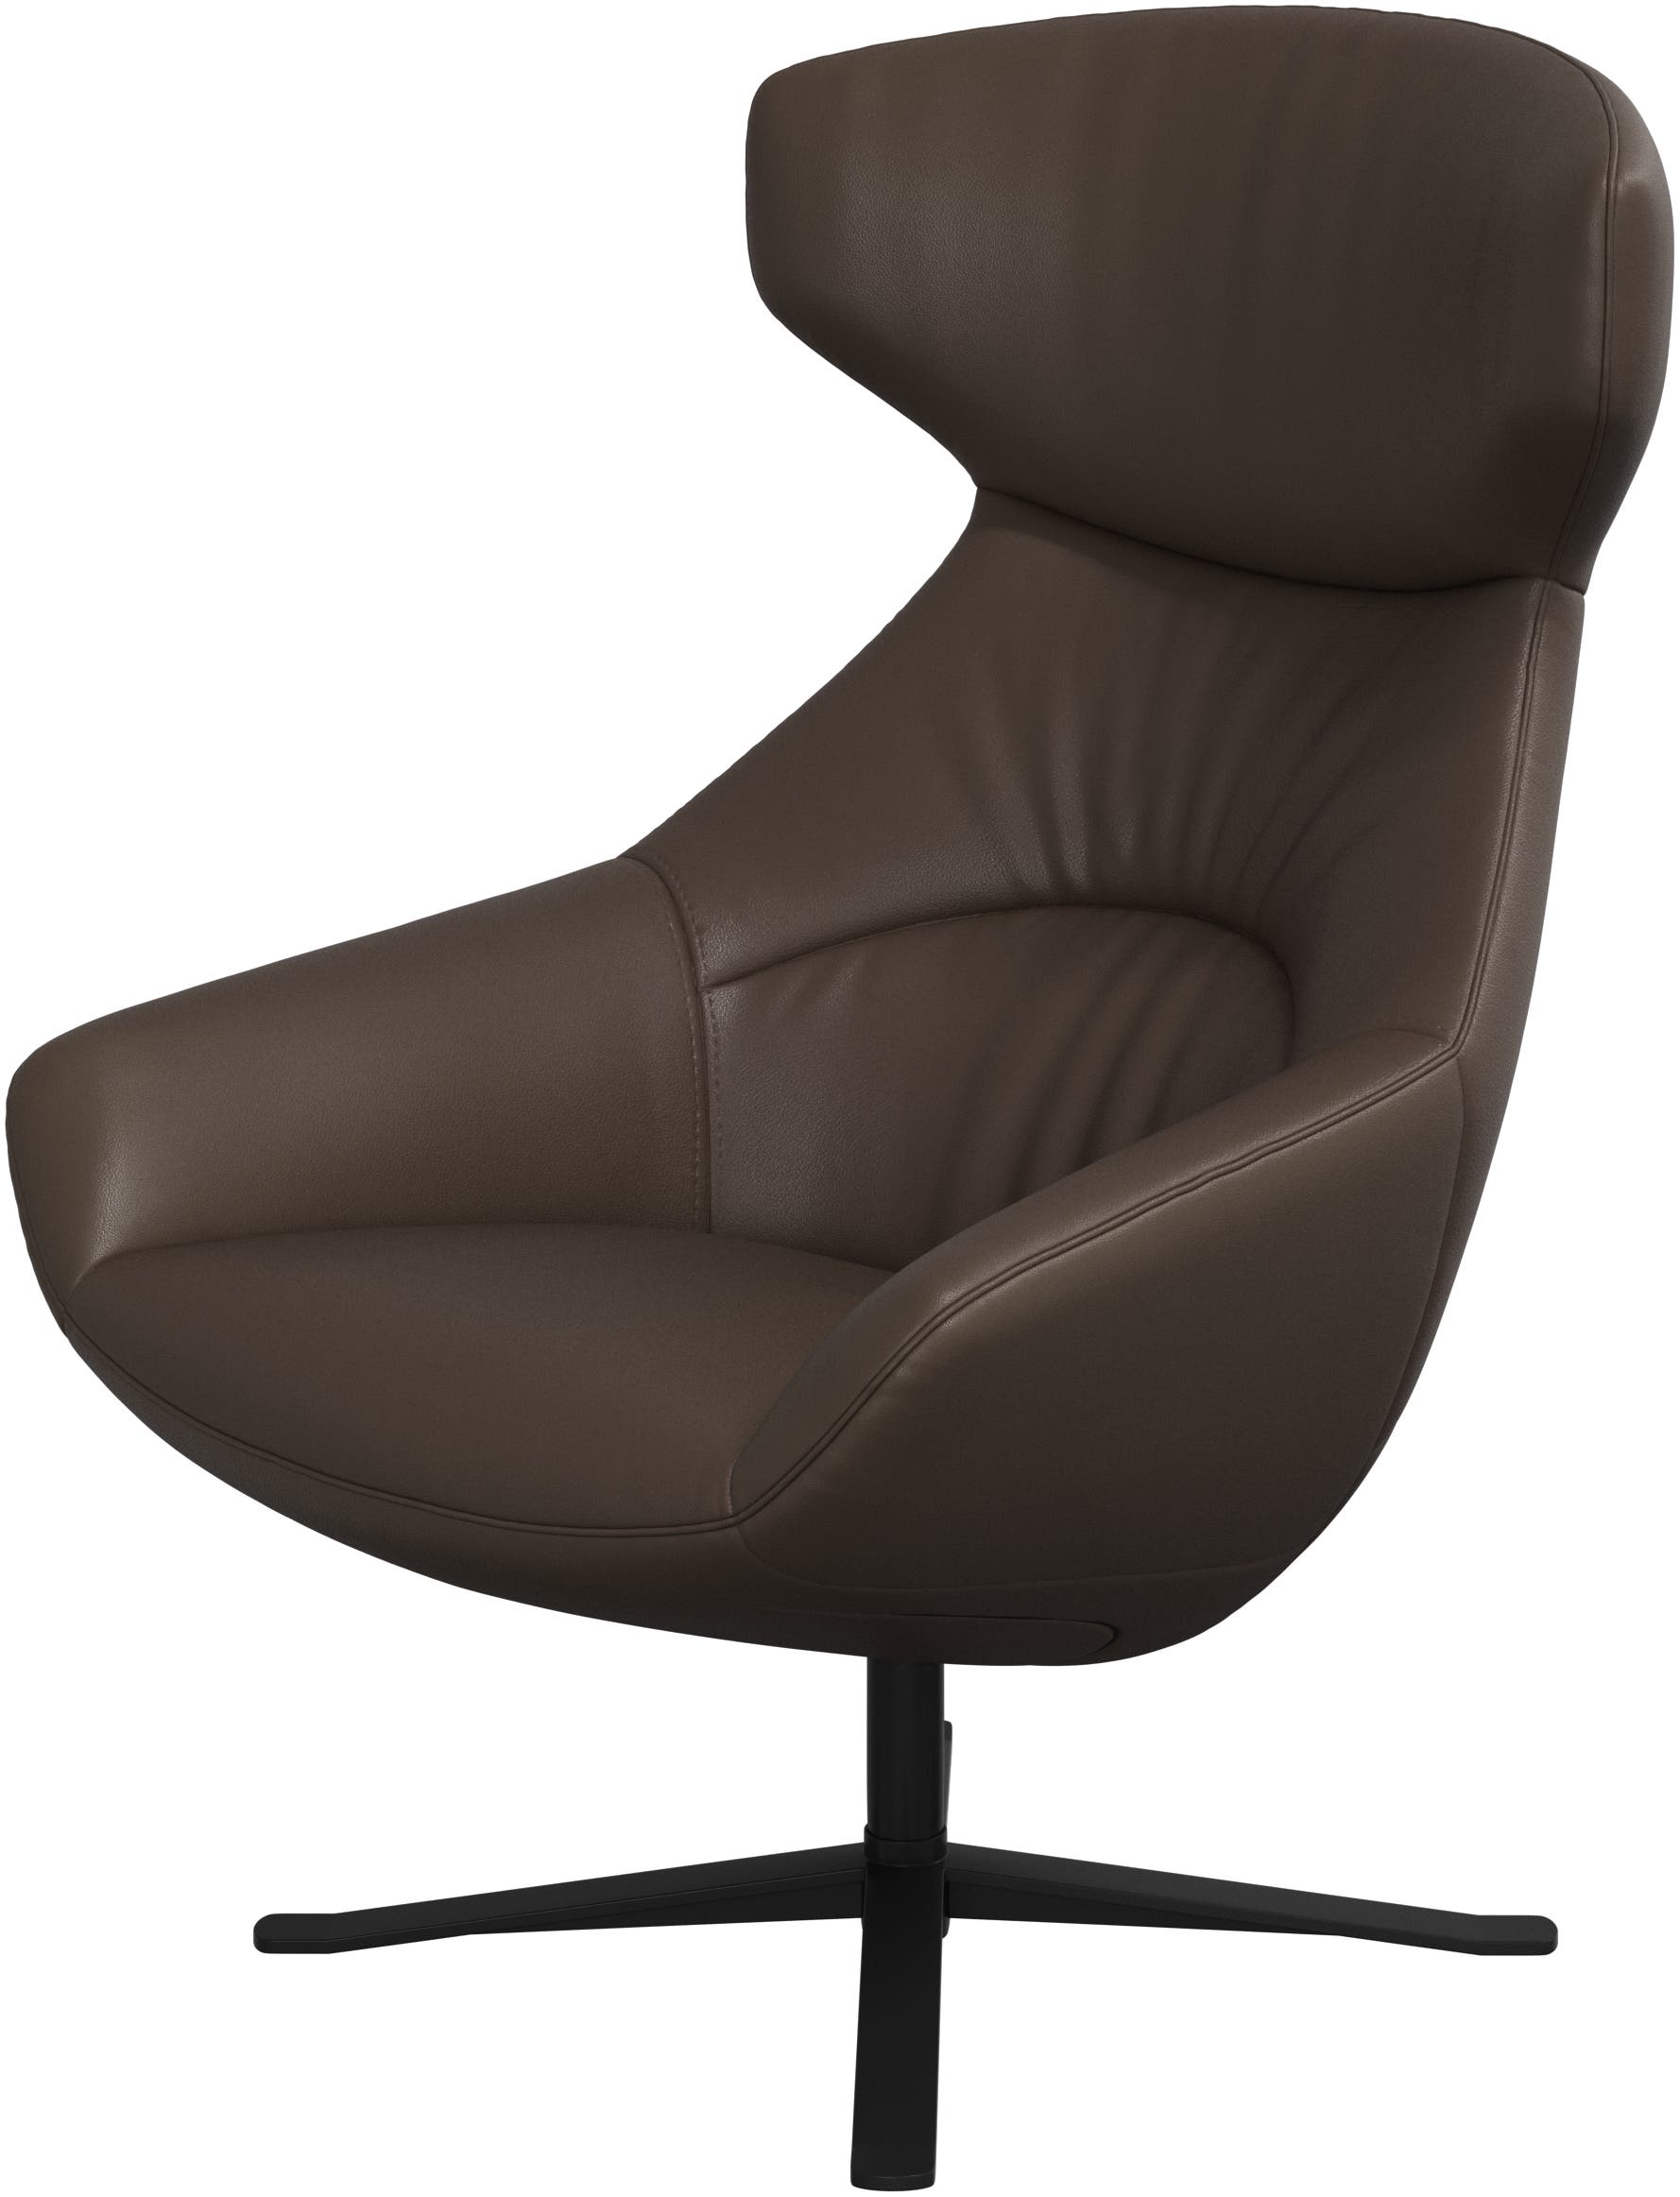 Porto chair with swivel function